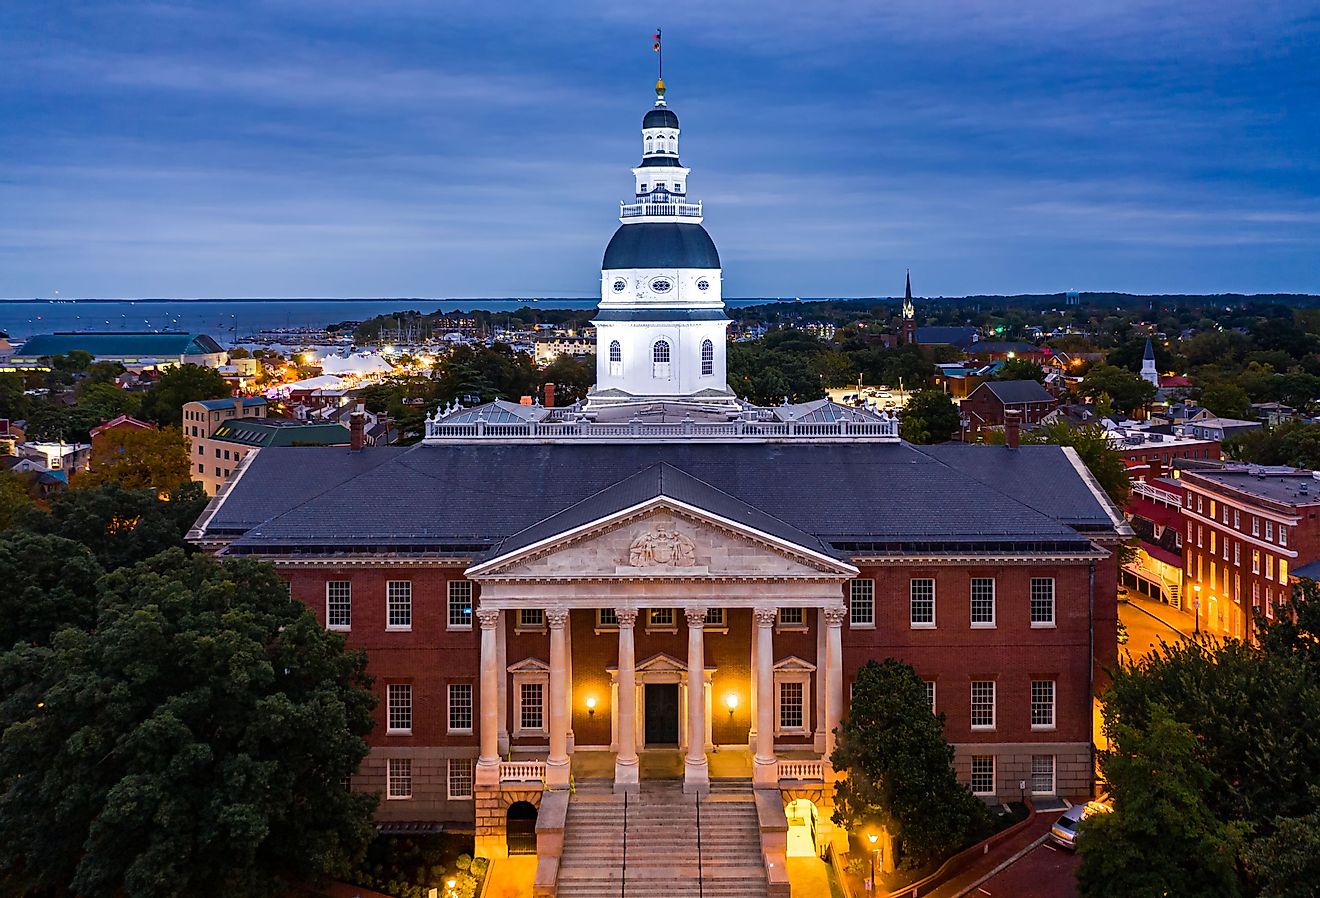 Maryland State House, in Annapolis, at dusk. Image credit: Mihai_Andritoiu via Shutterstock